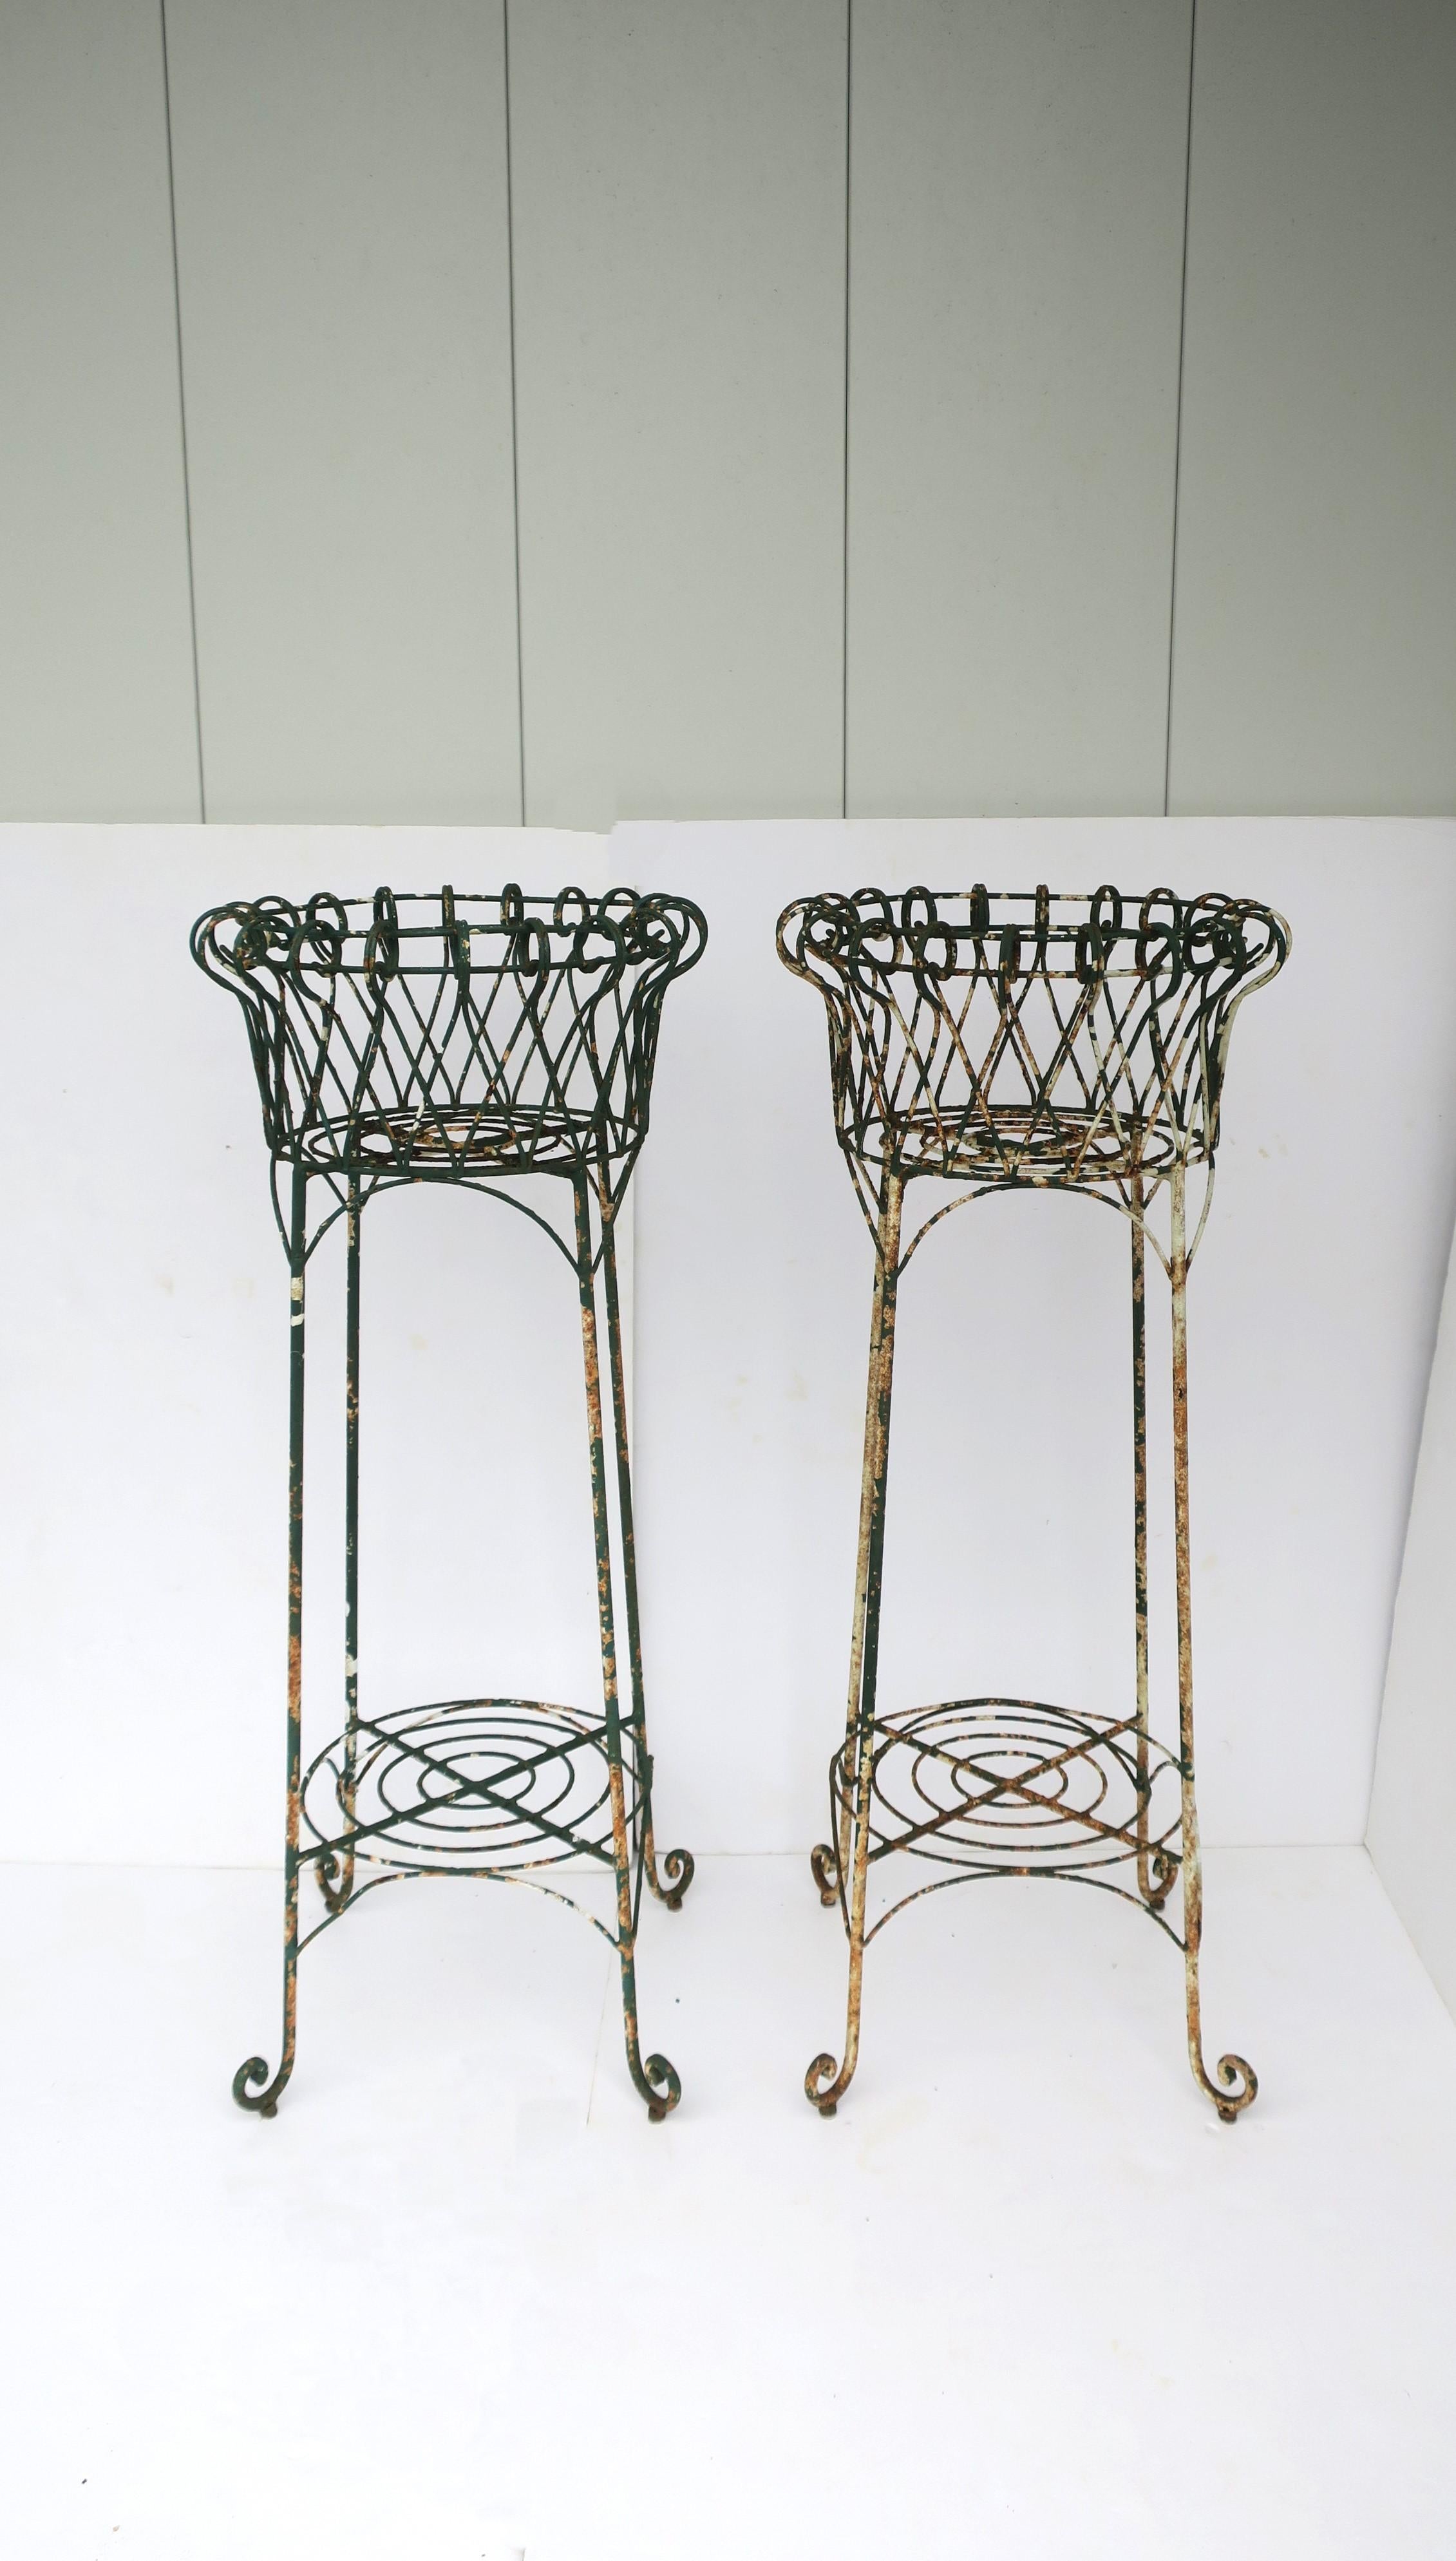 A pair of matching French iron wire garden plant pot holder stands jardinieres, circa early-20th century, France. This sculptural pair display beautifully as shown with ferns on outdoor porch area; set are green and white painted iron plant or